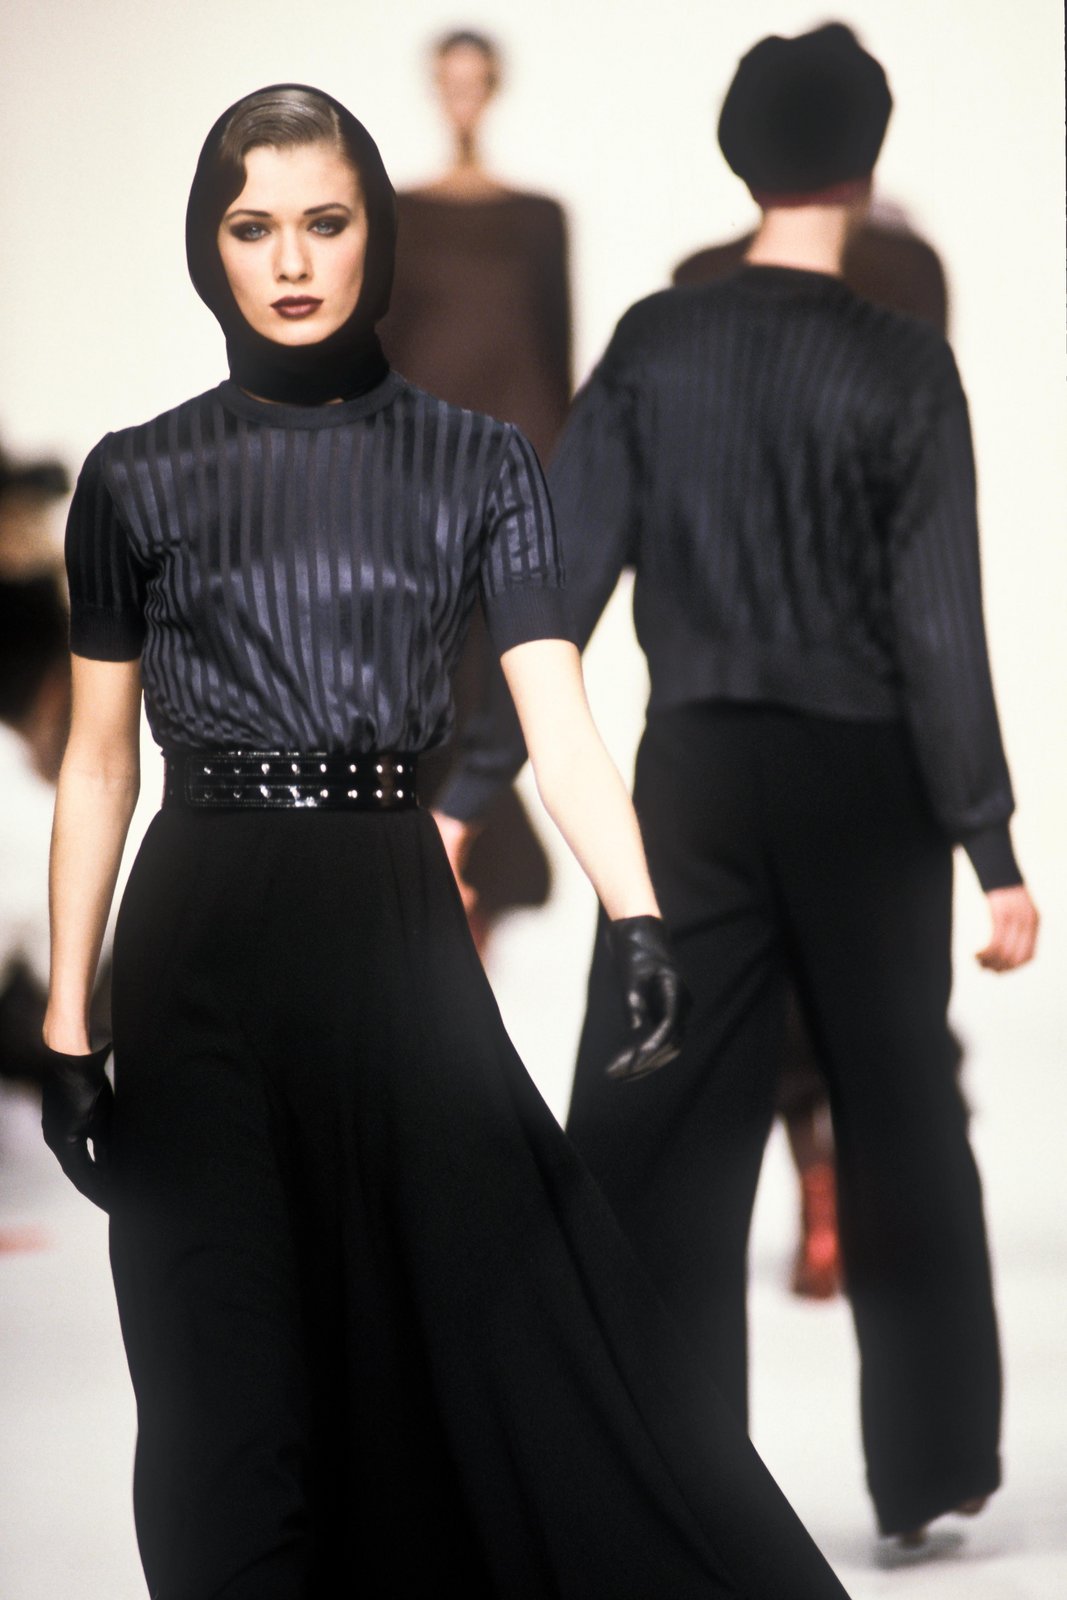 Fashion Classic: Dorothee Bis Fall/Winter 1991 | Lipstick Alley